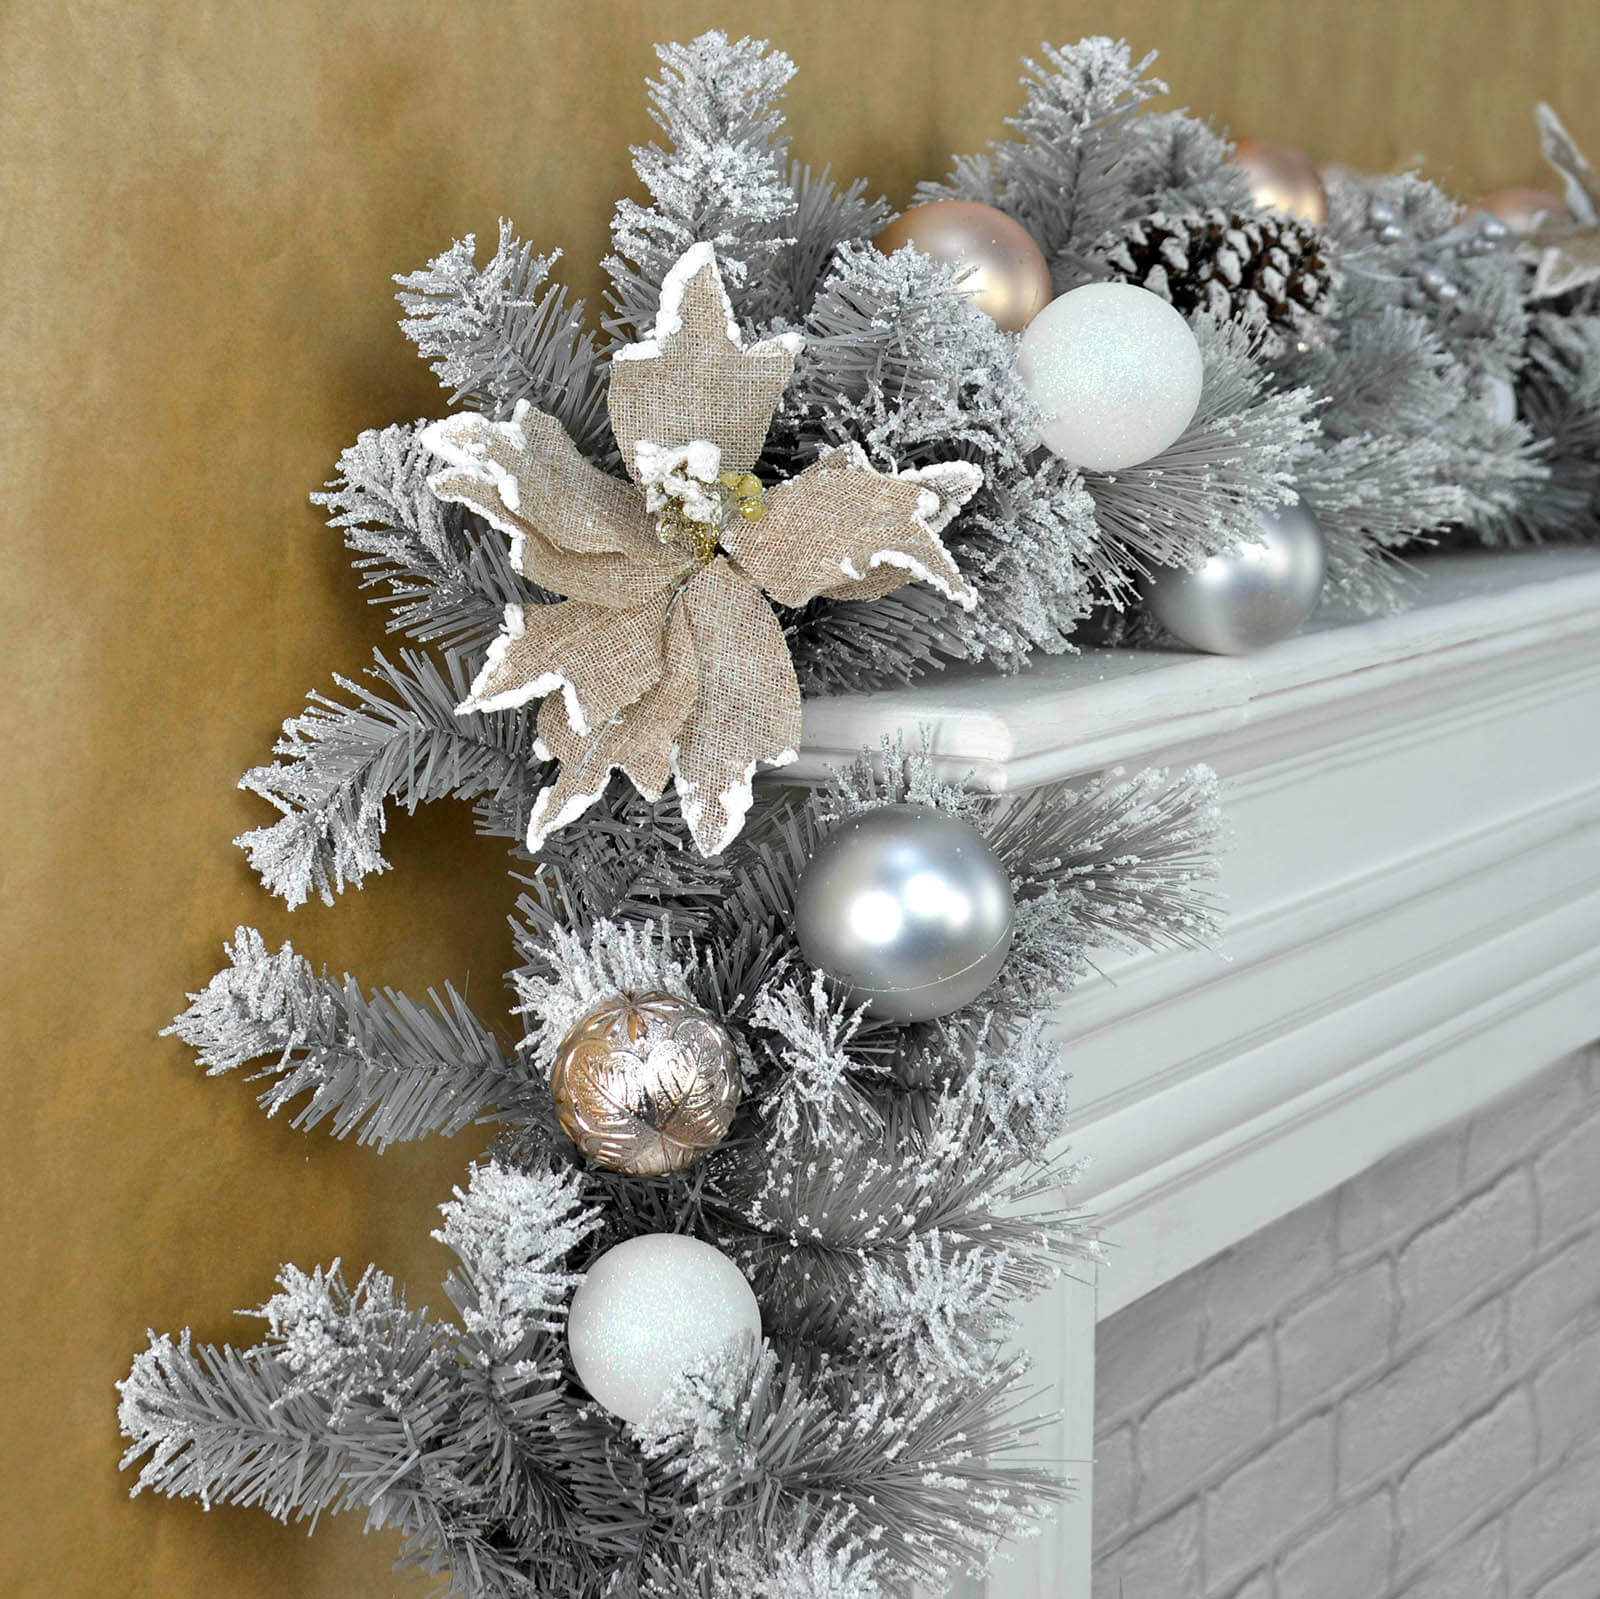 snowy grey garland on fireplace ledge featuring hessian poinsettia, silver gold and white baubles and glittery tips